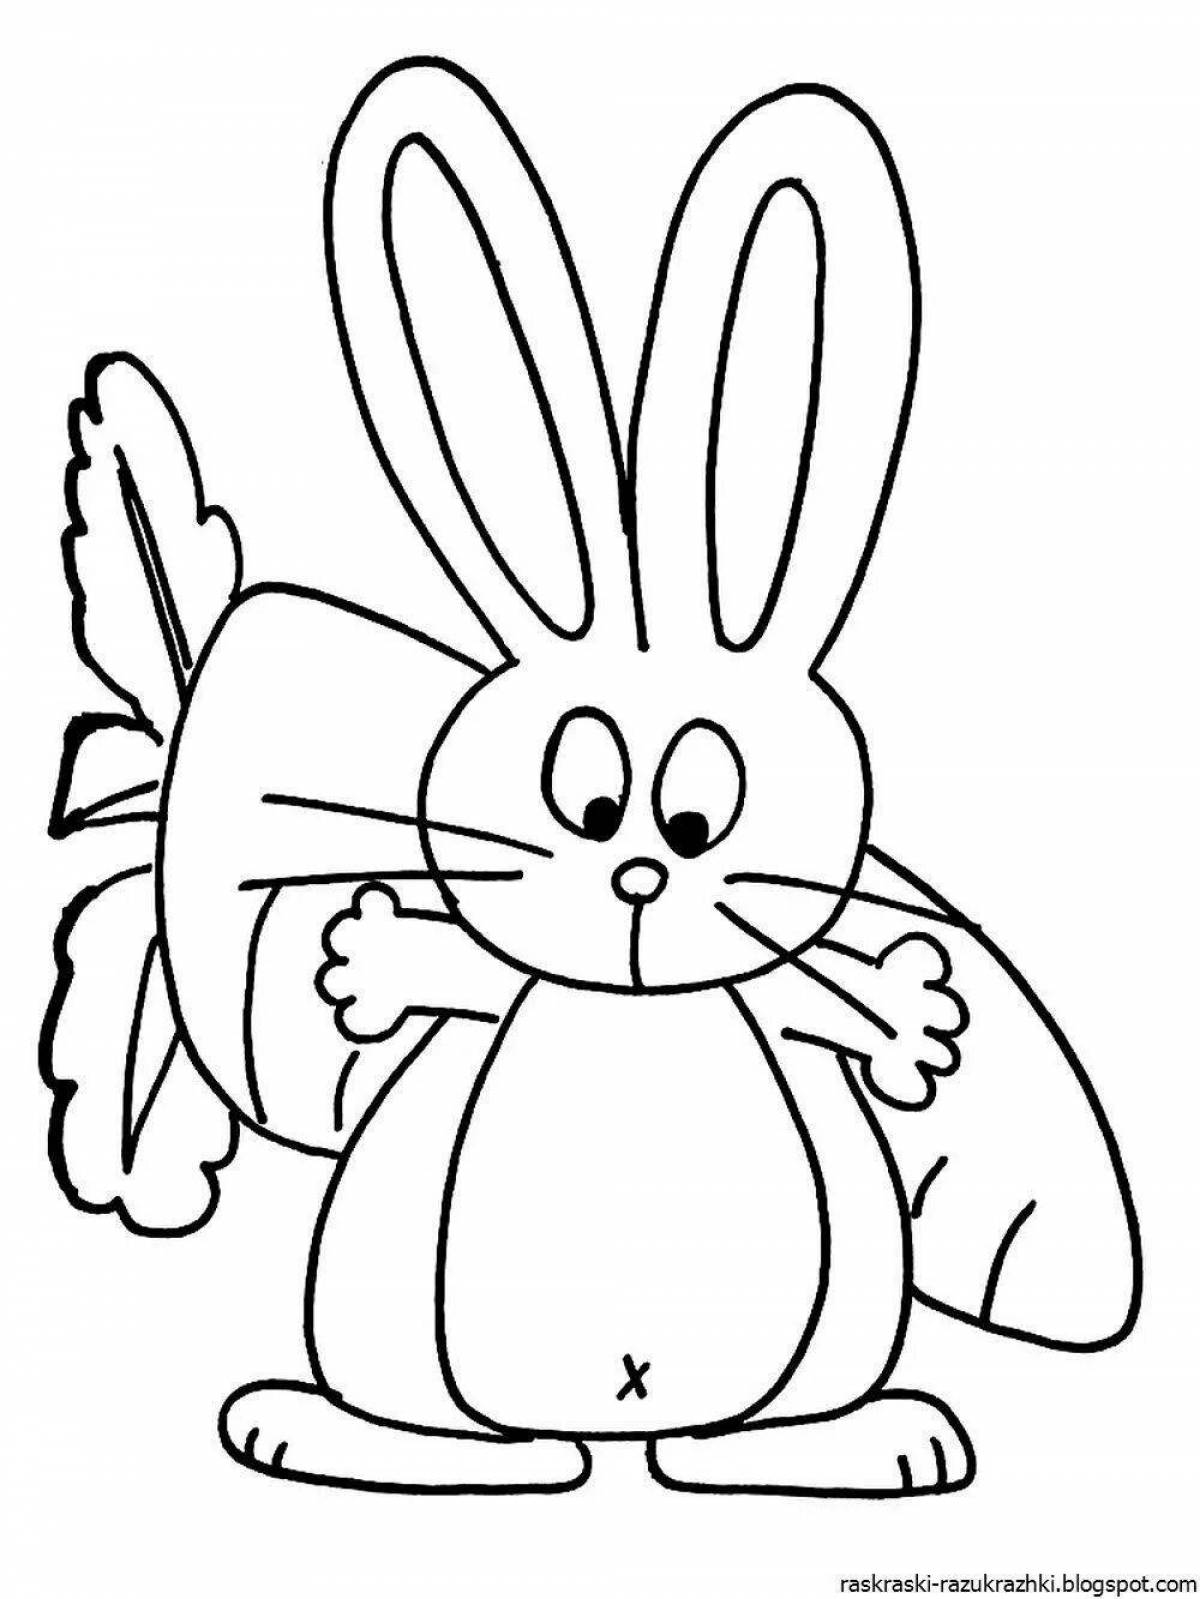 Fabulous rabbit coloring book for kids 2-3 years old